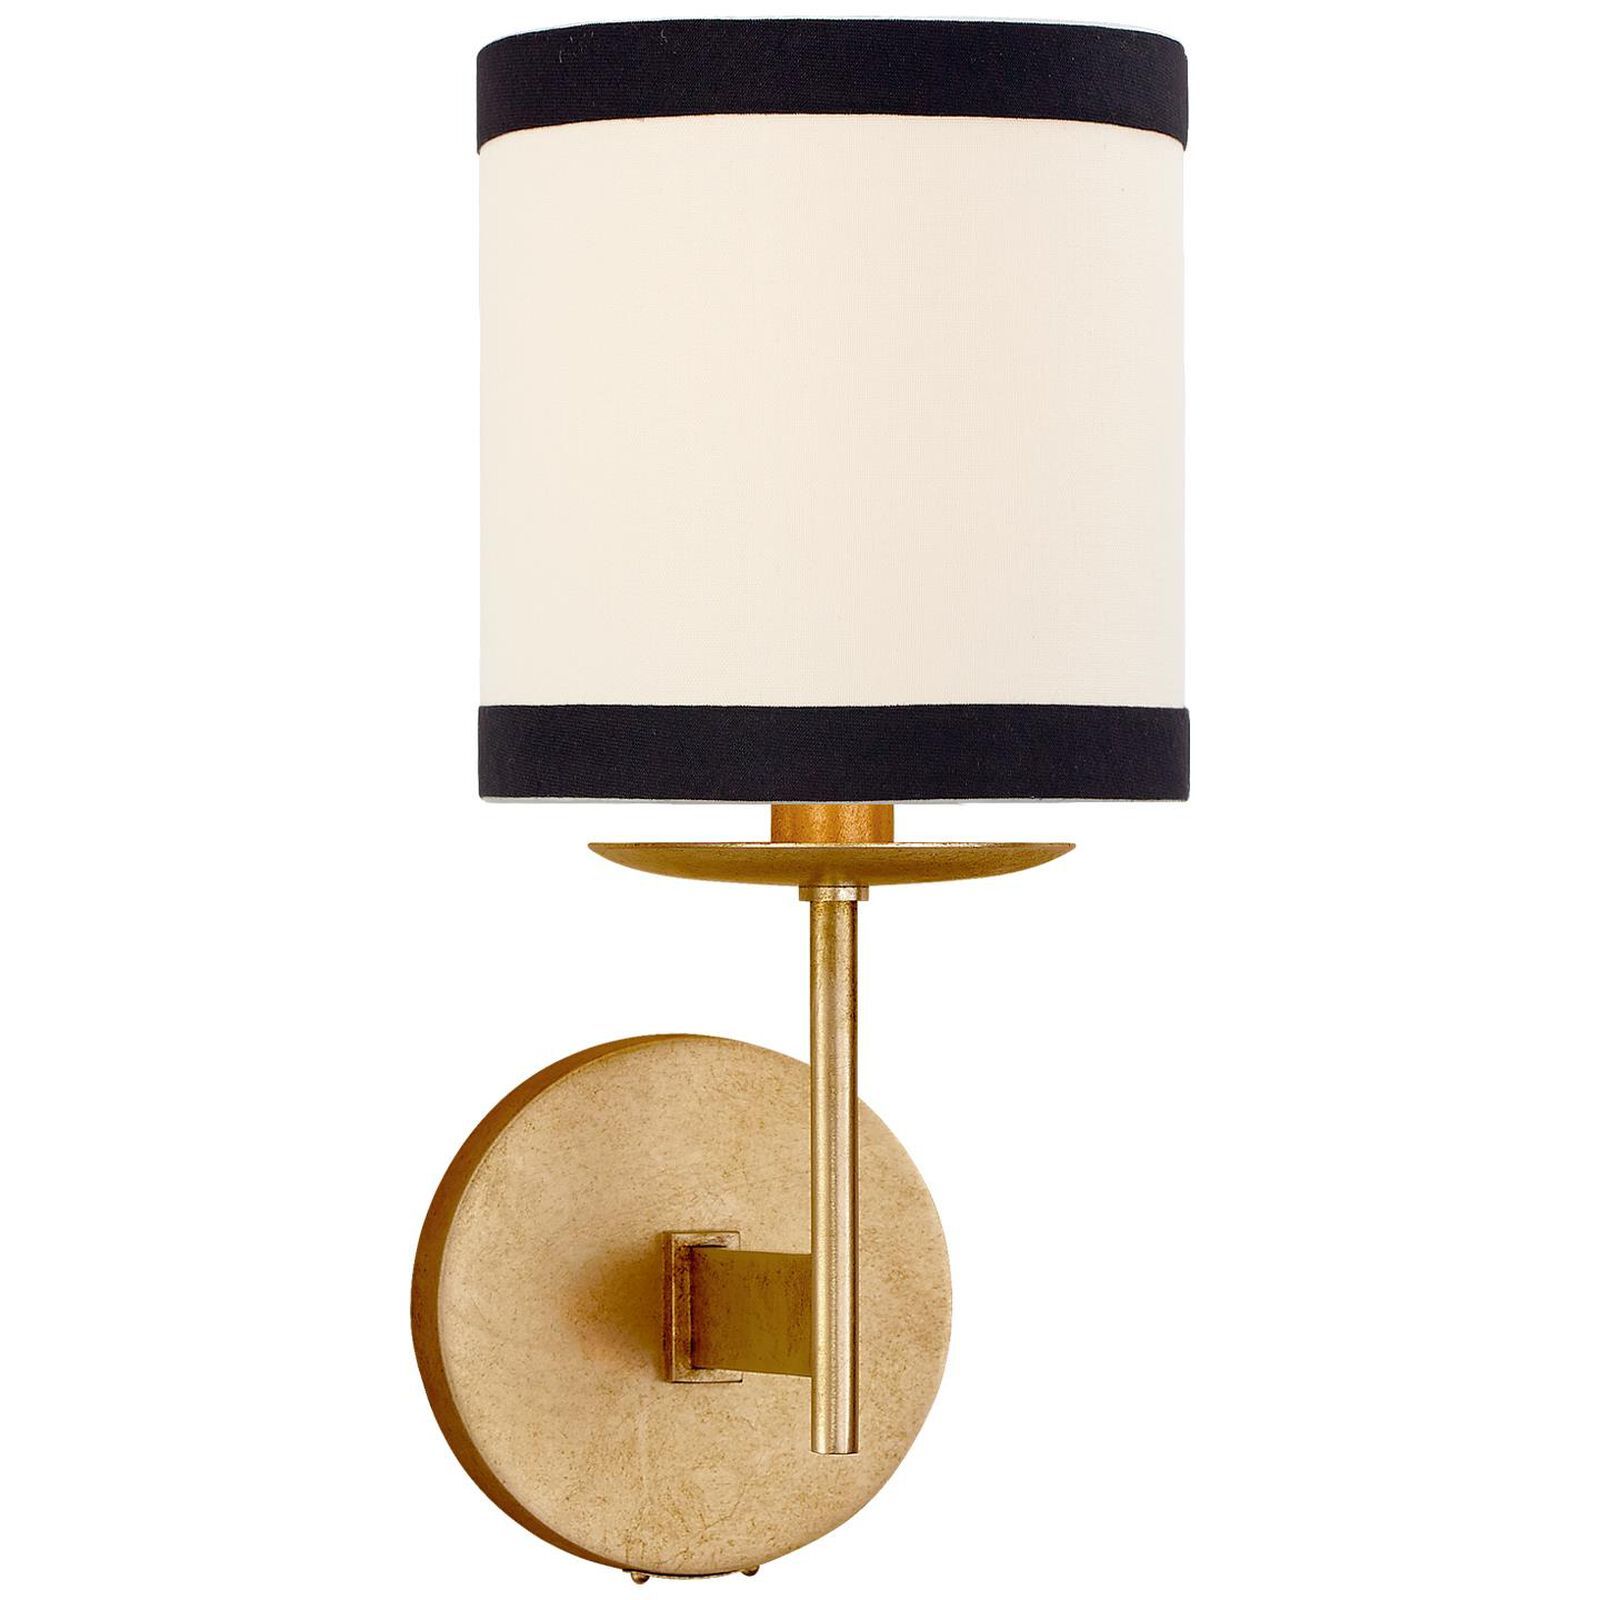 Visual Comfort and Co. Kate Spade New York Walker 12 Inch Wall Sconce | 1800 Lighting